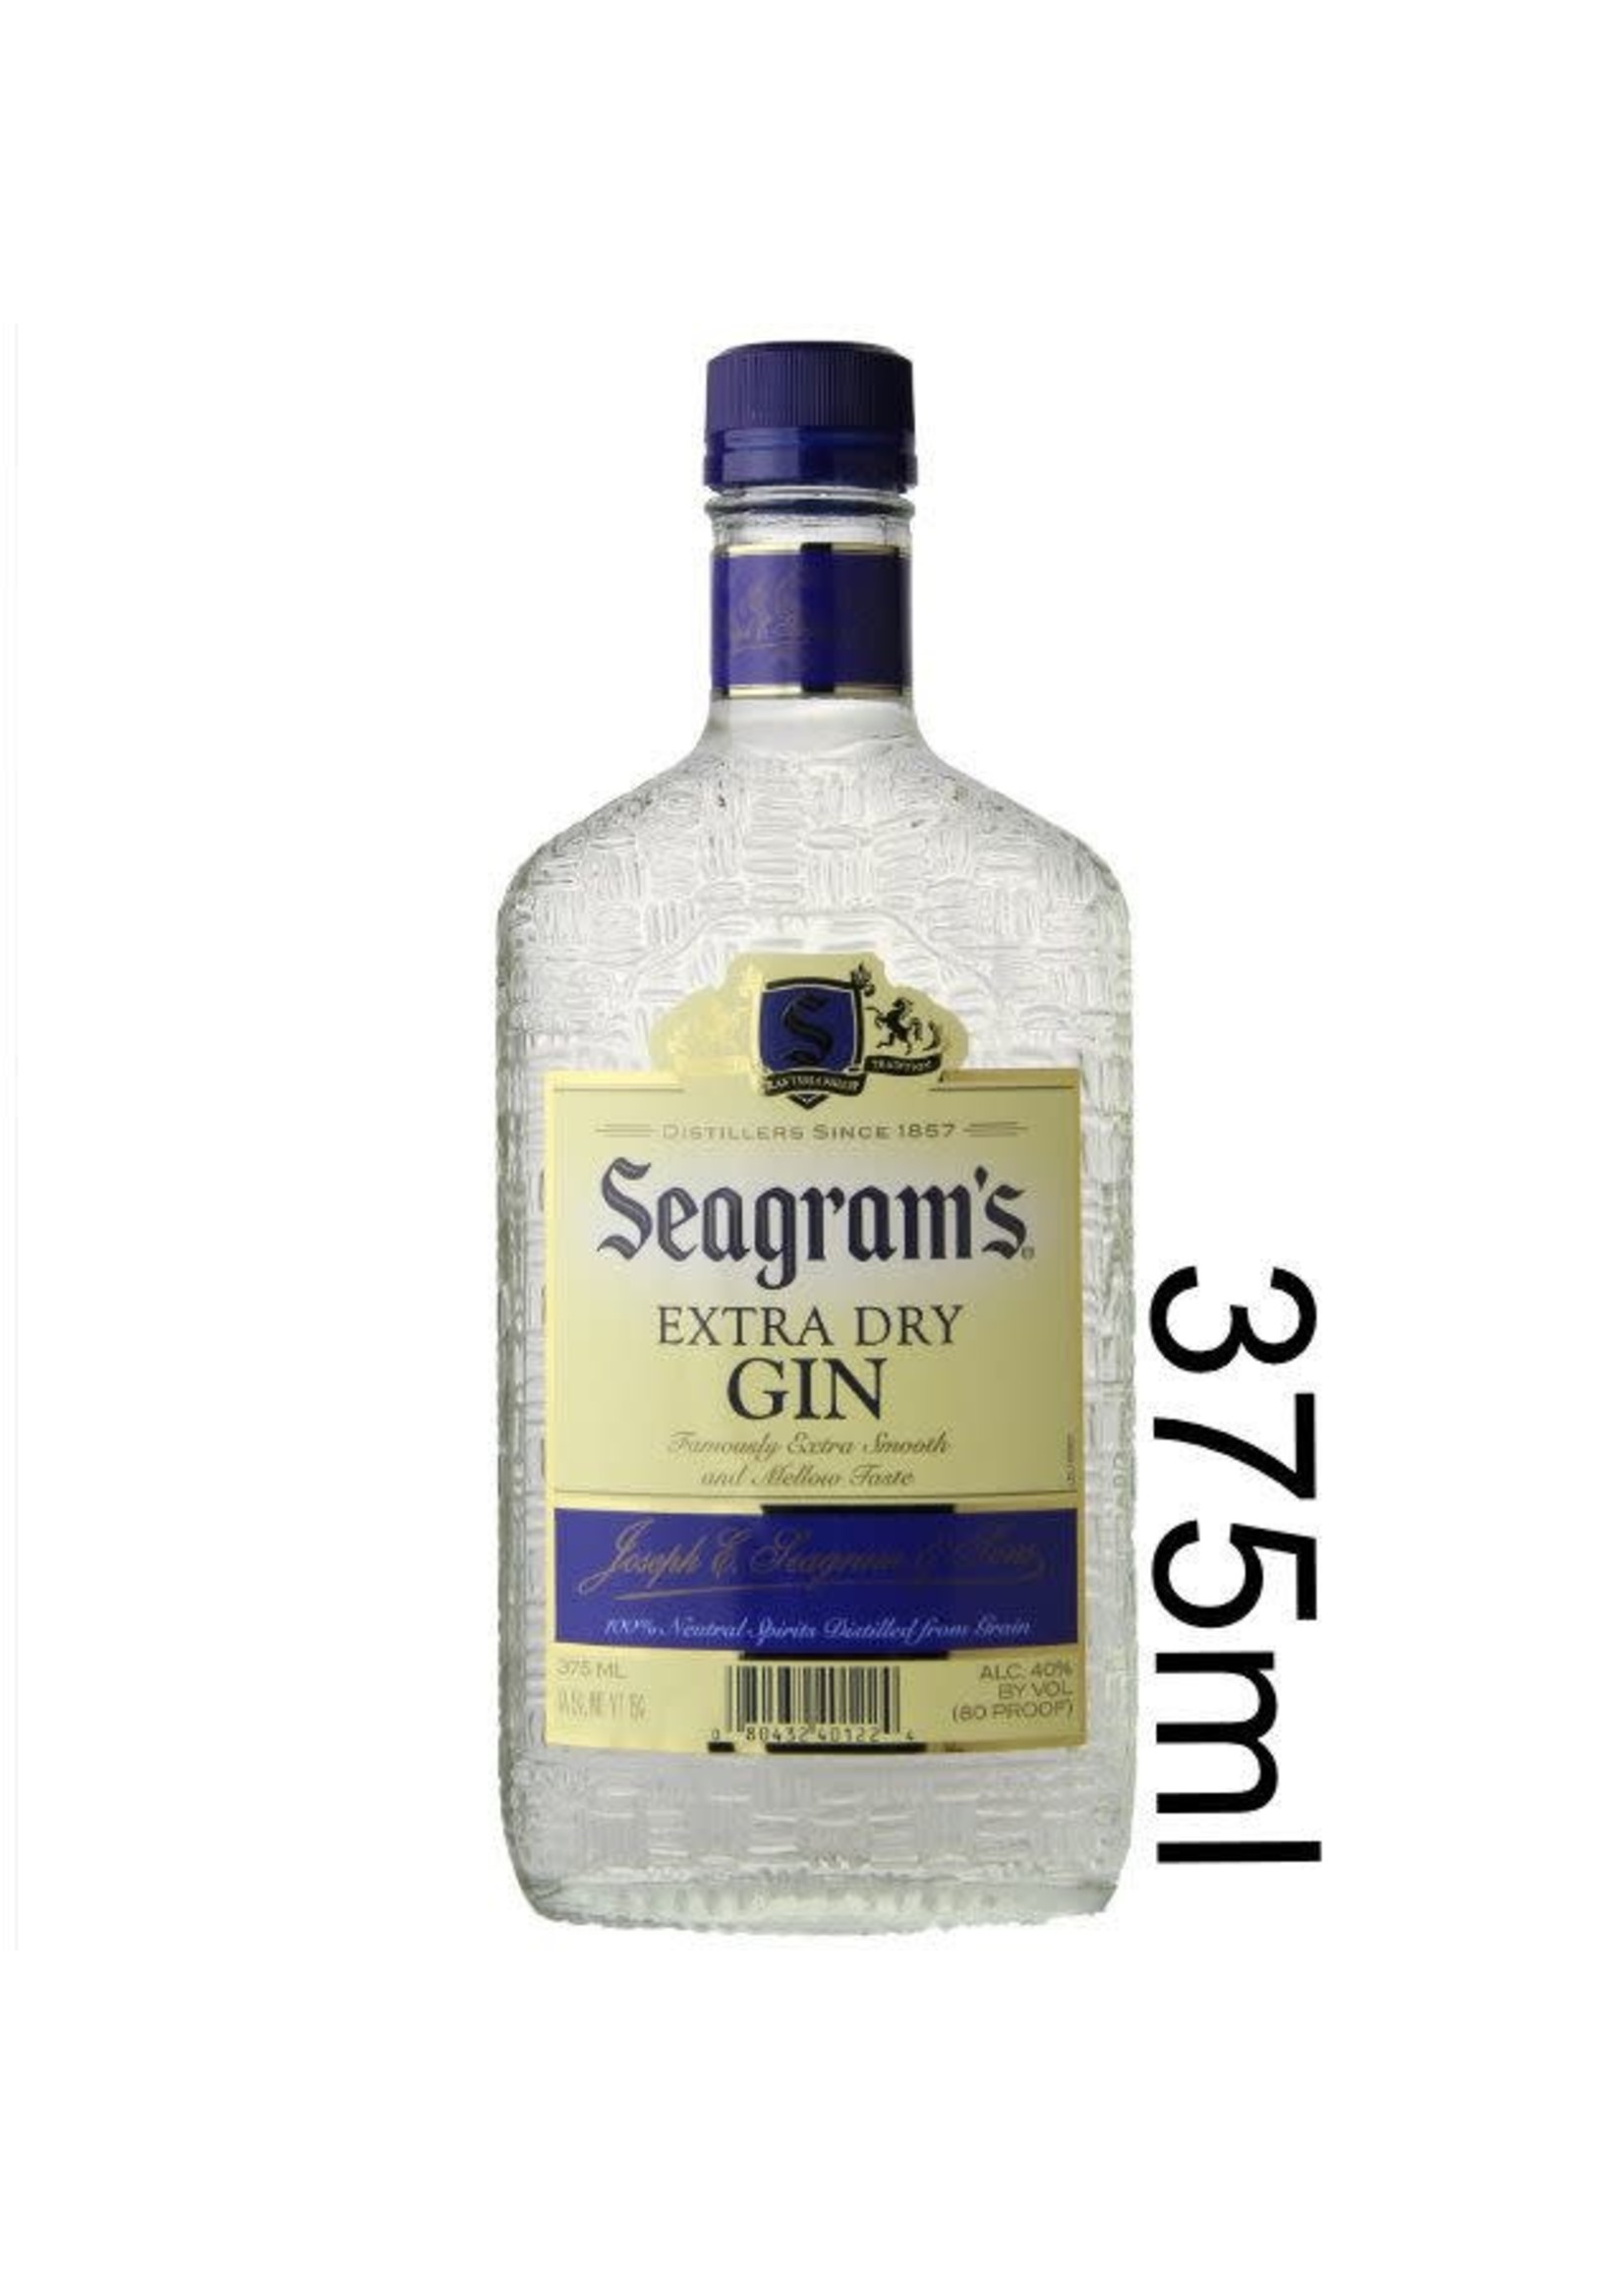 Seagrams Extra Dry Gin 80Proof 375ml